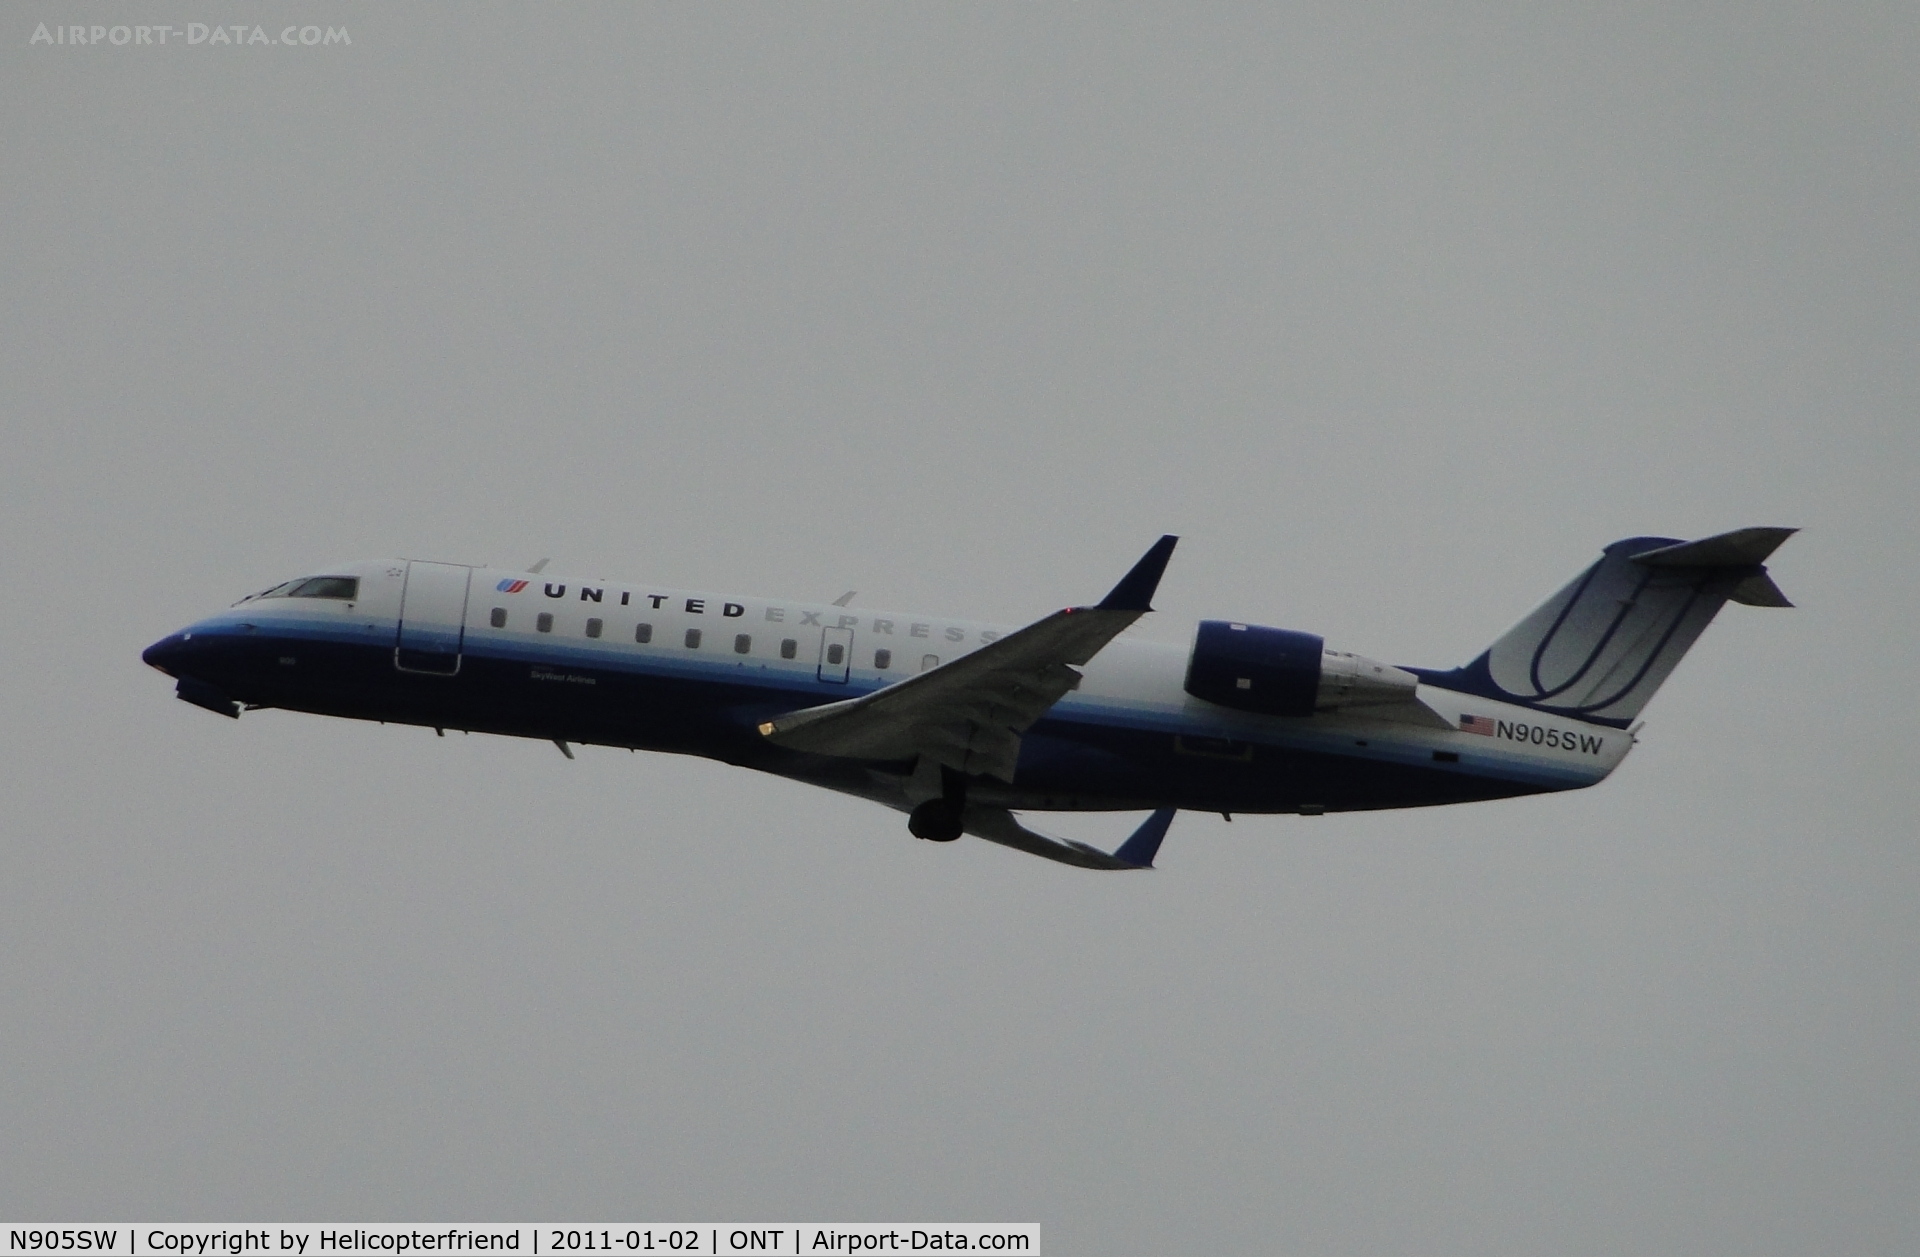 N905SW, 2000 Bombardier CRJ-200LR (CL-600-2B19) C/N 7437, Taking off westbound from runway 26R, wheels coming up